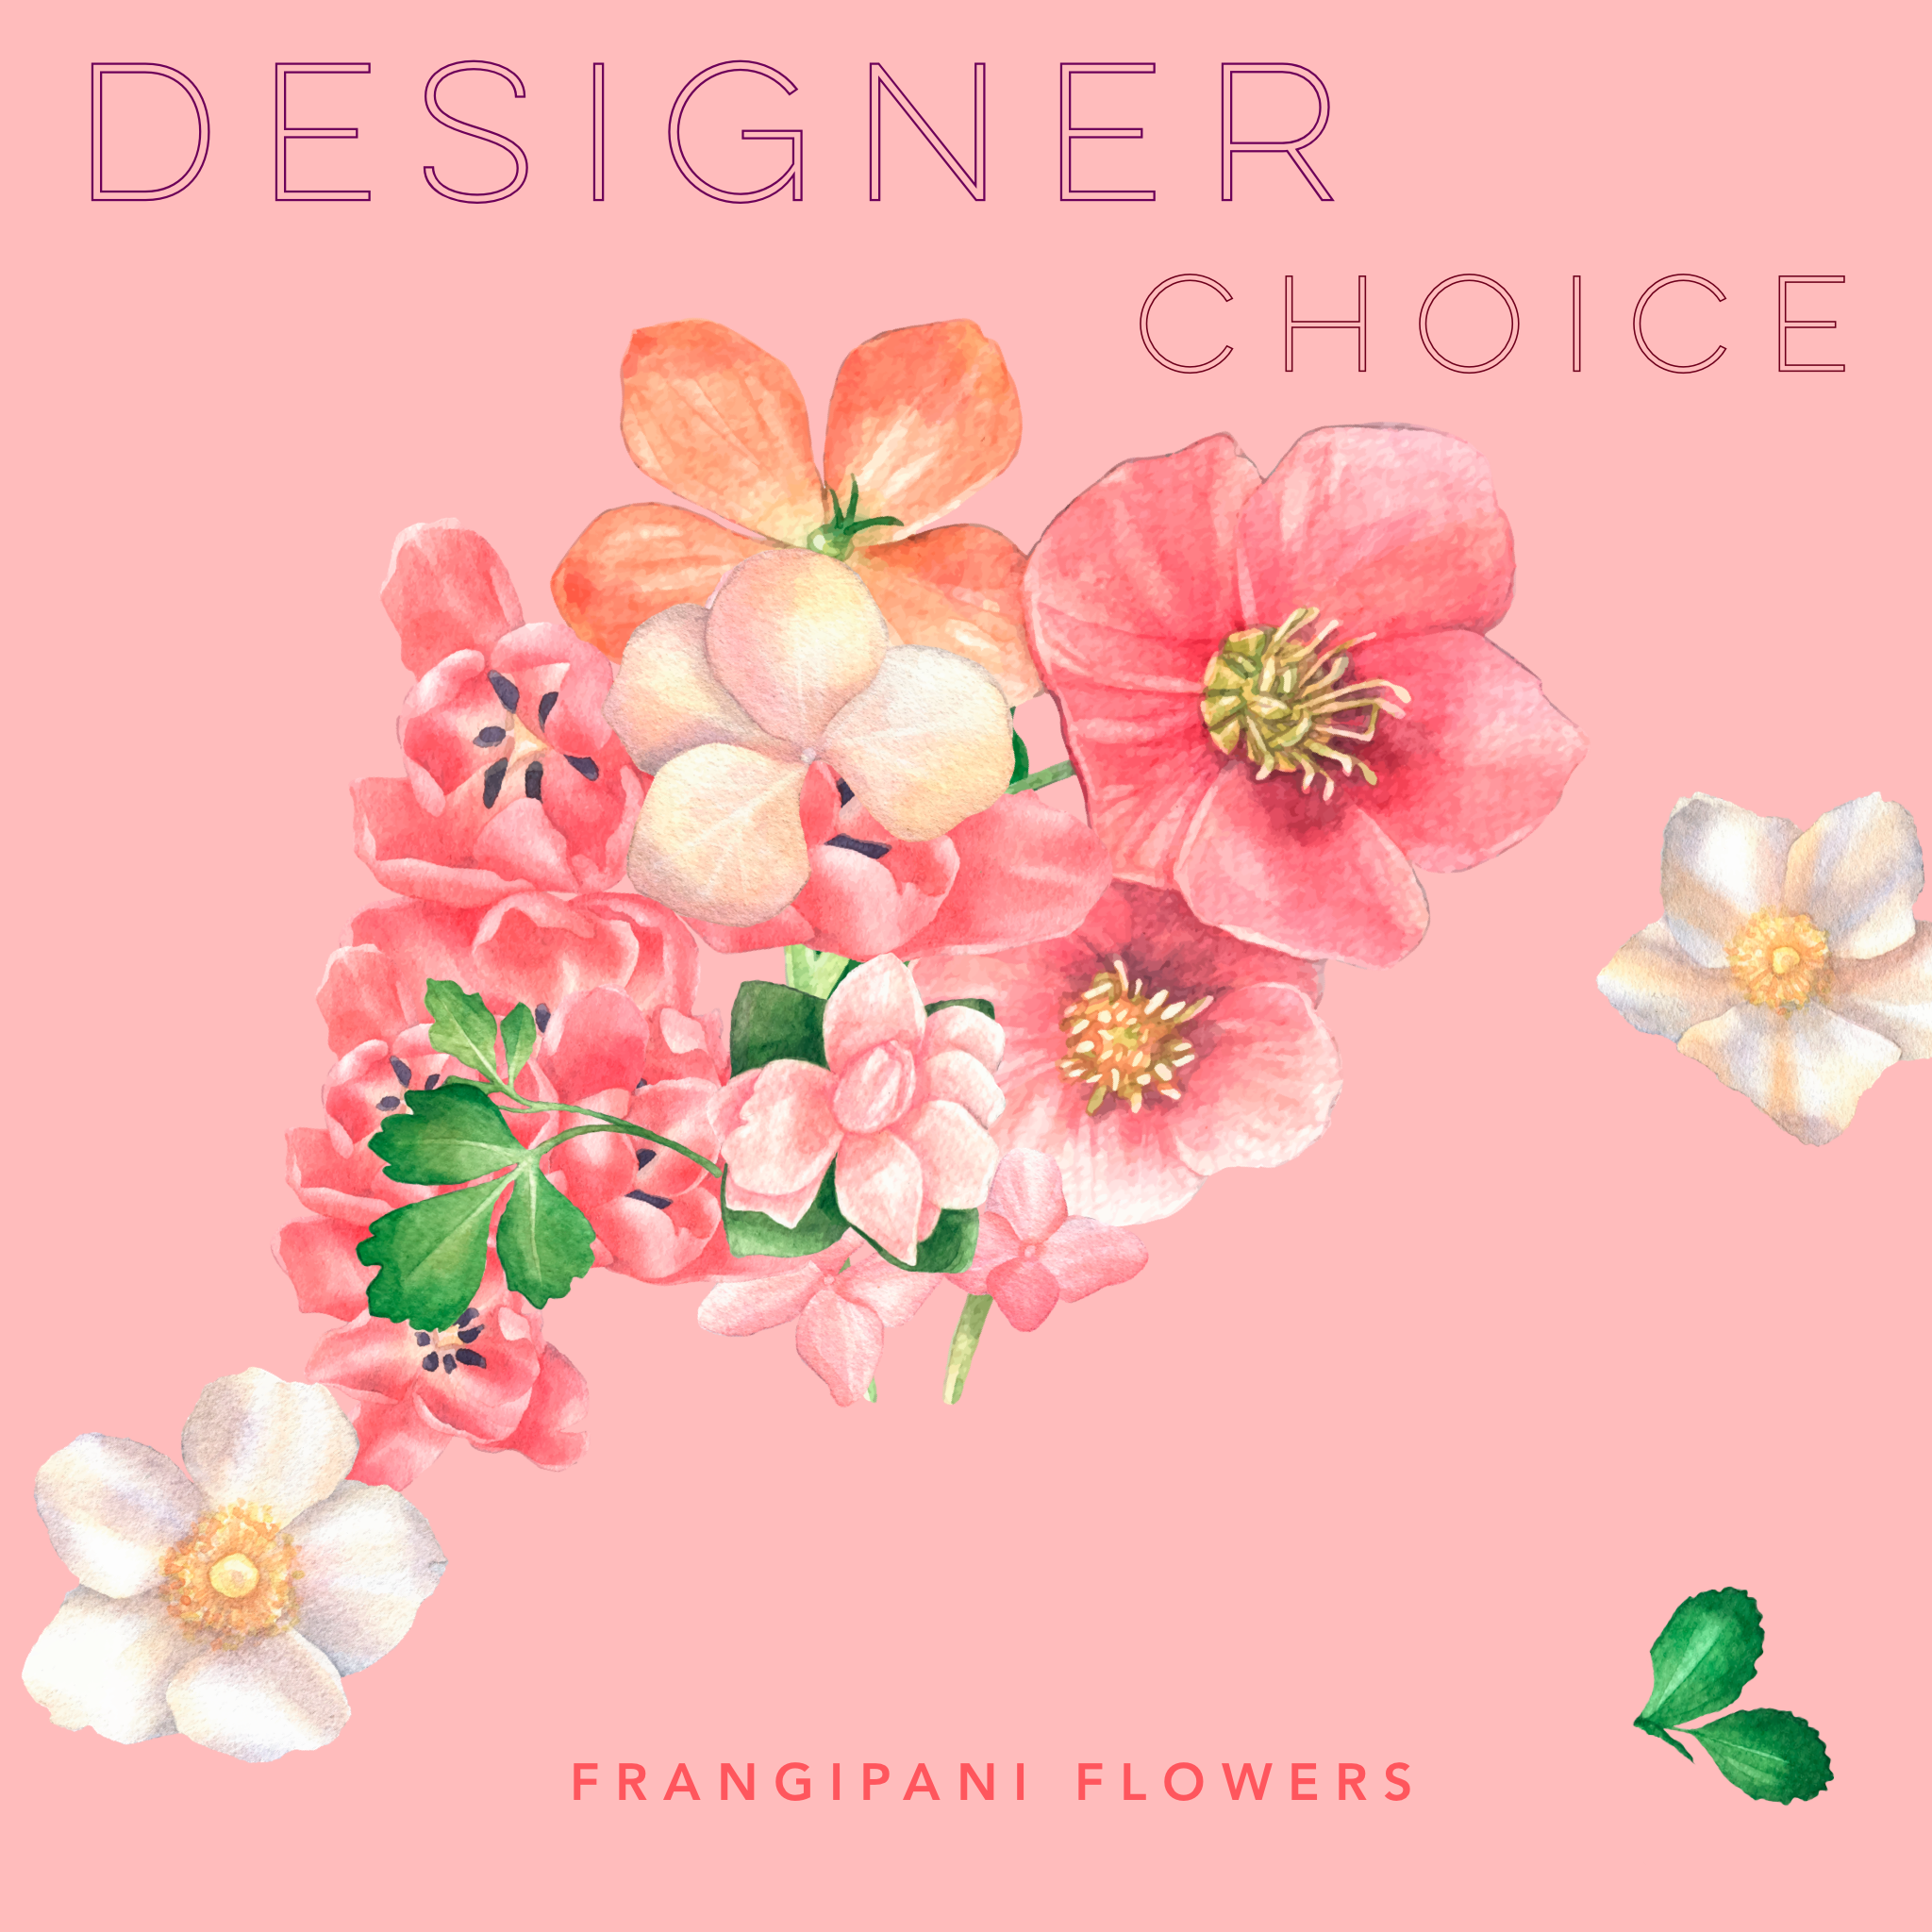 Designer's Choice Bouquets from $50 → $160